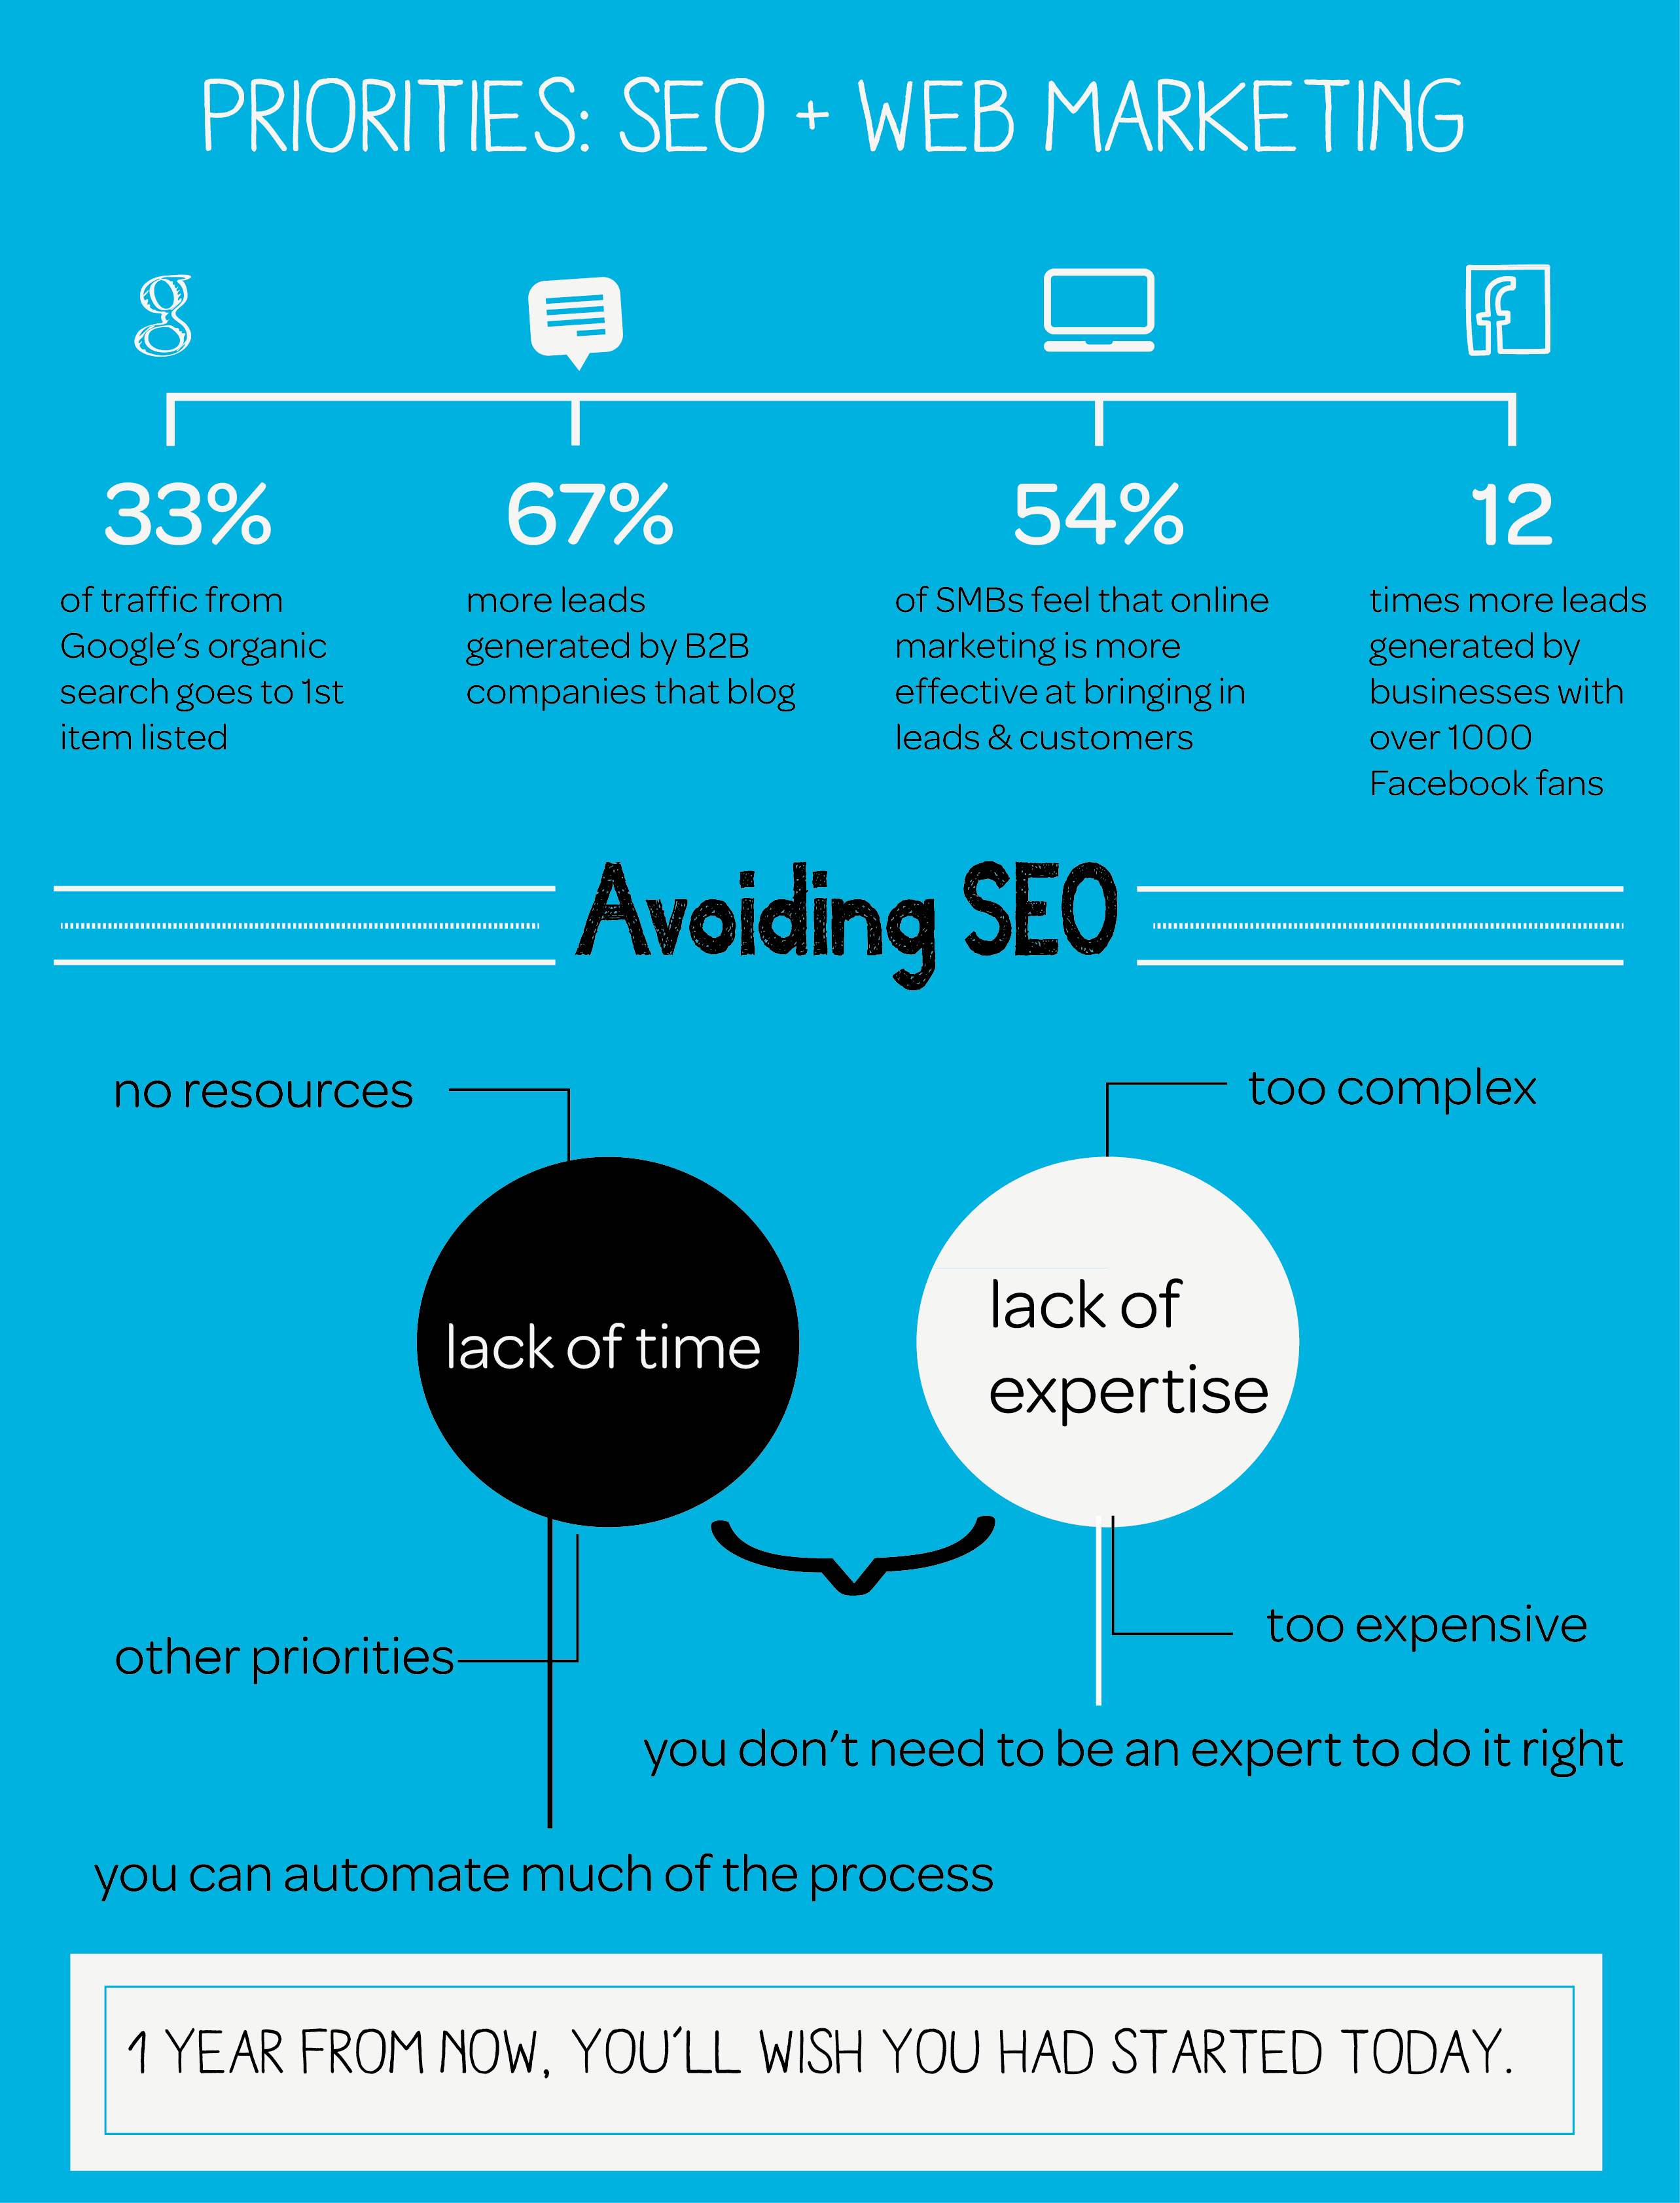 SEO is time consuming